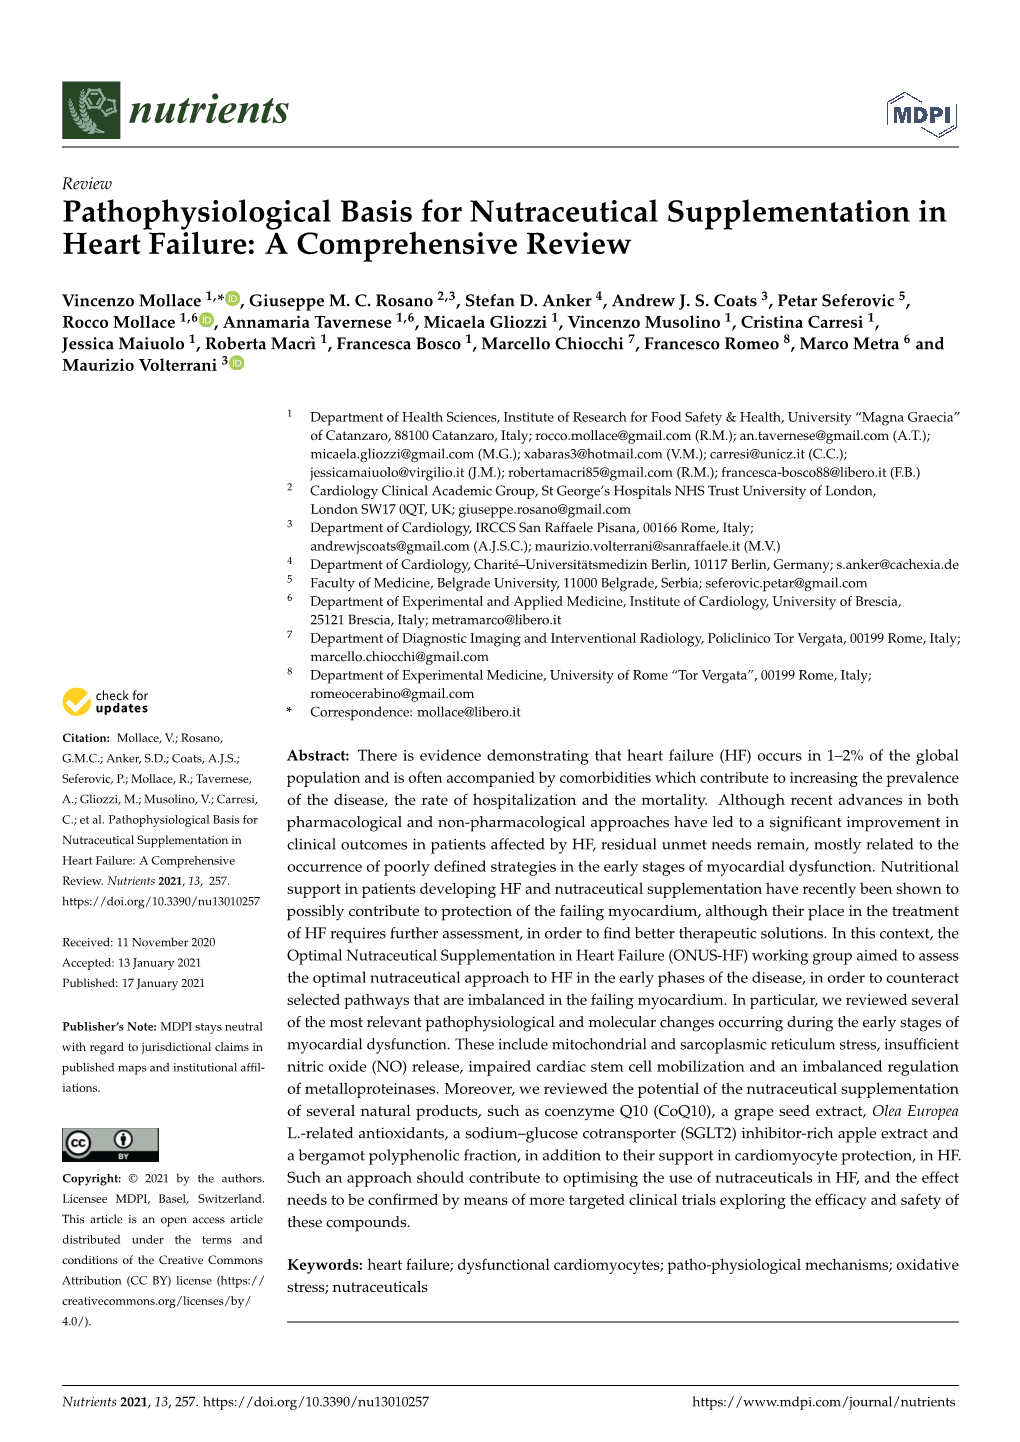 Pathophysiological Basis for Nutraceutical Supplementation in Heart Failure: a Comprehensive Review